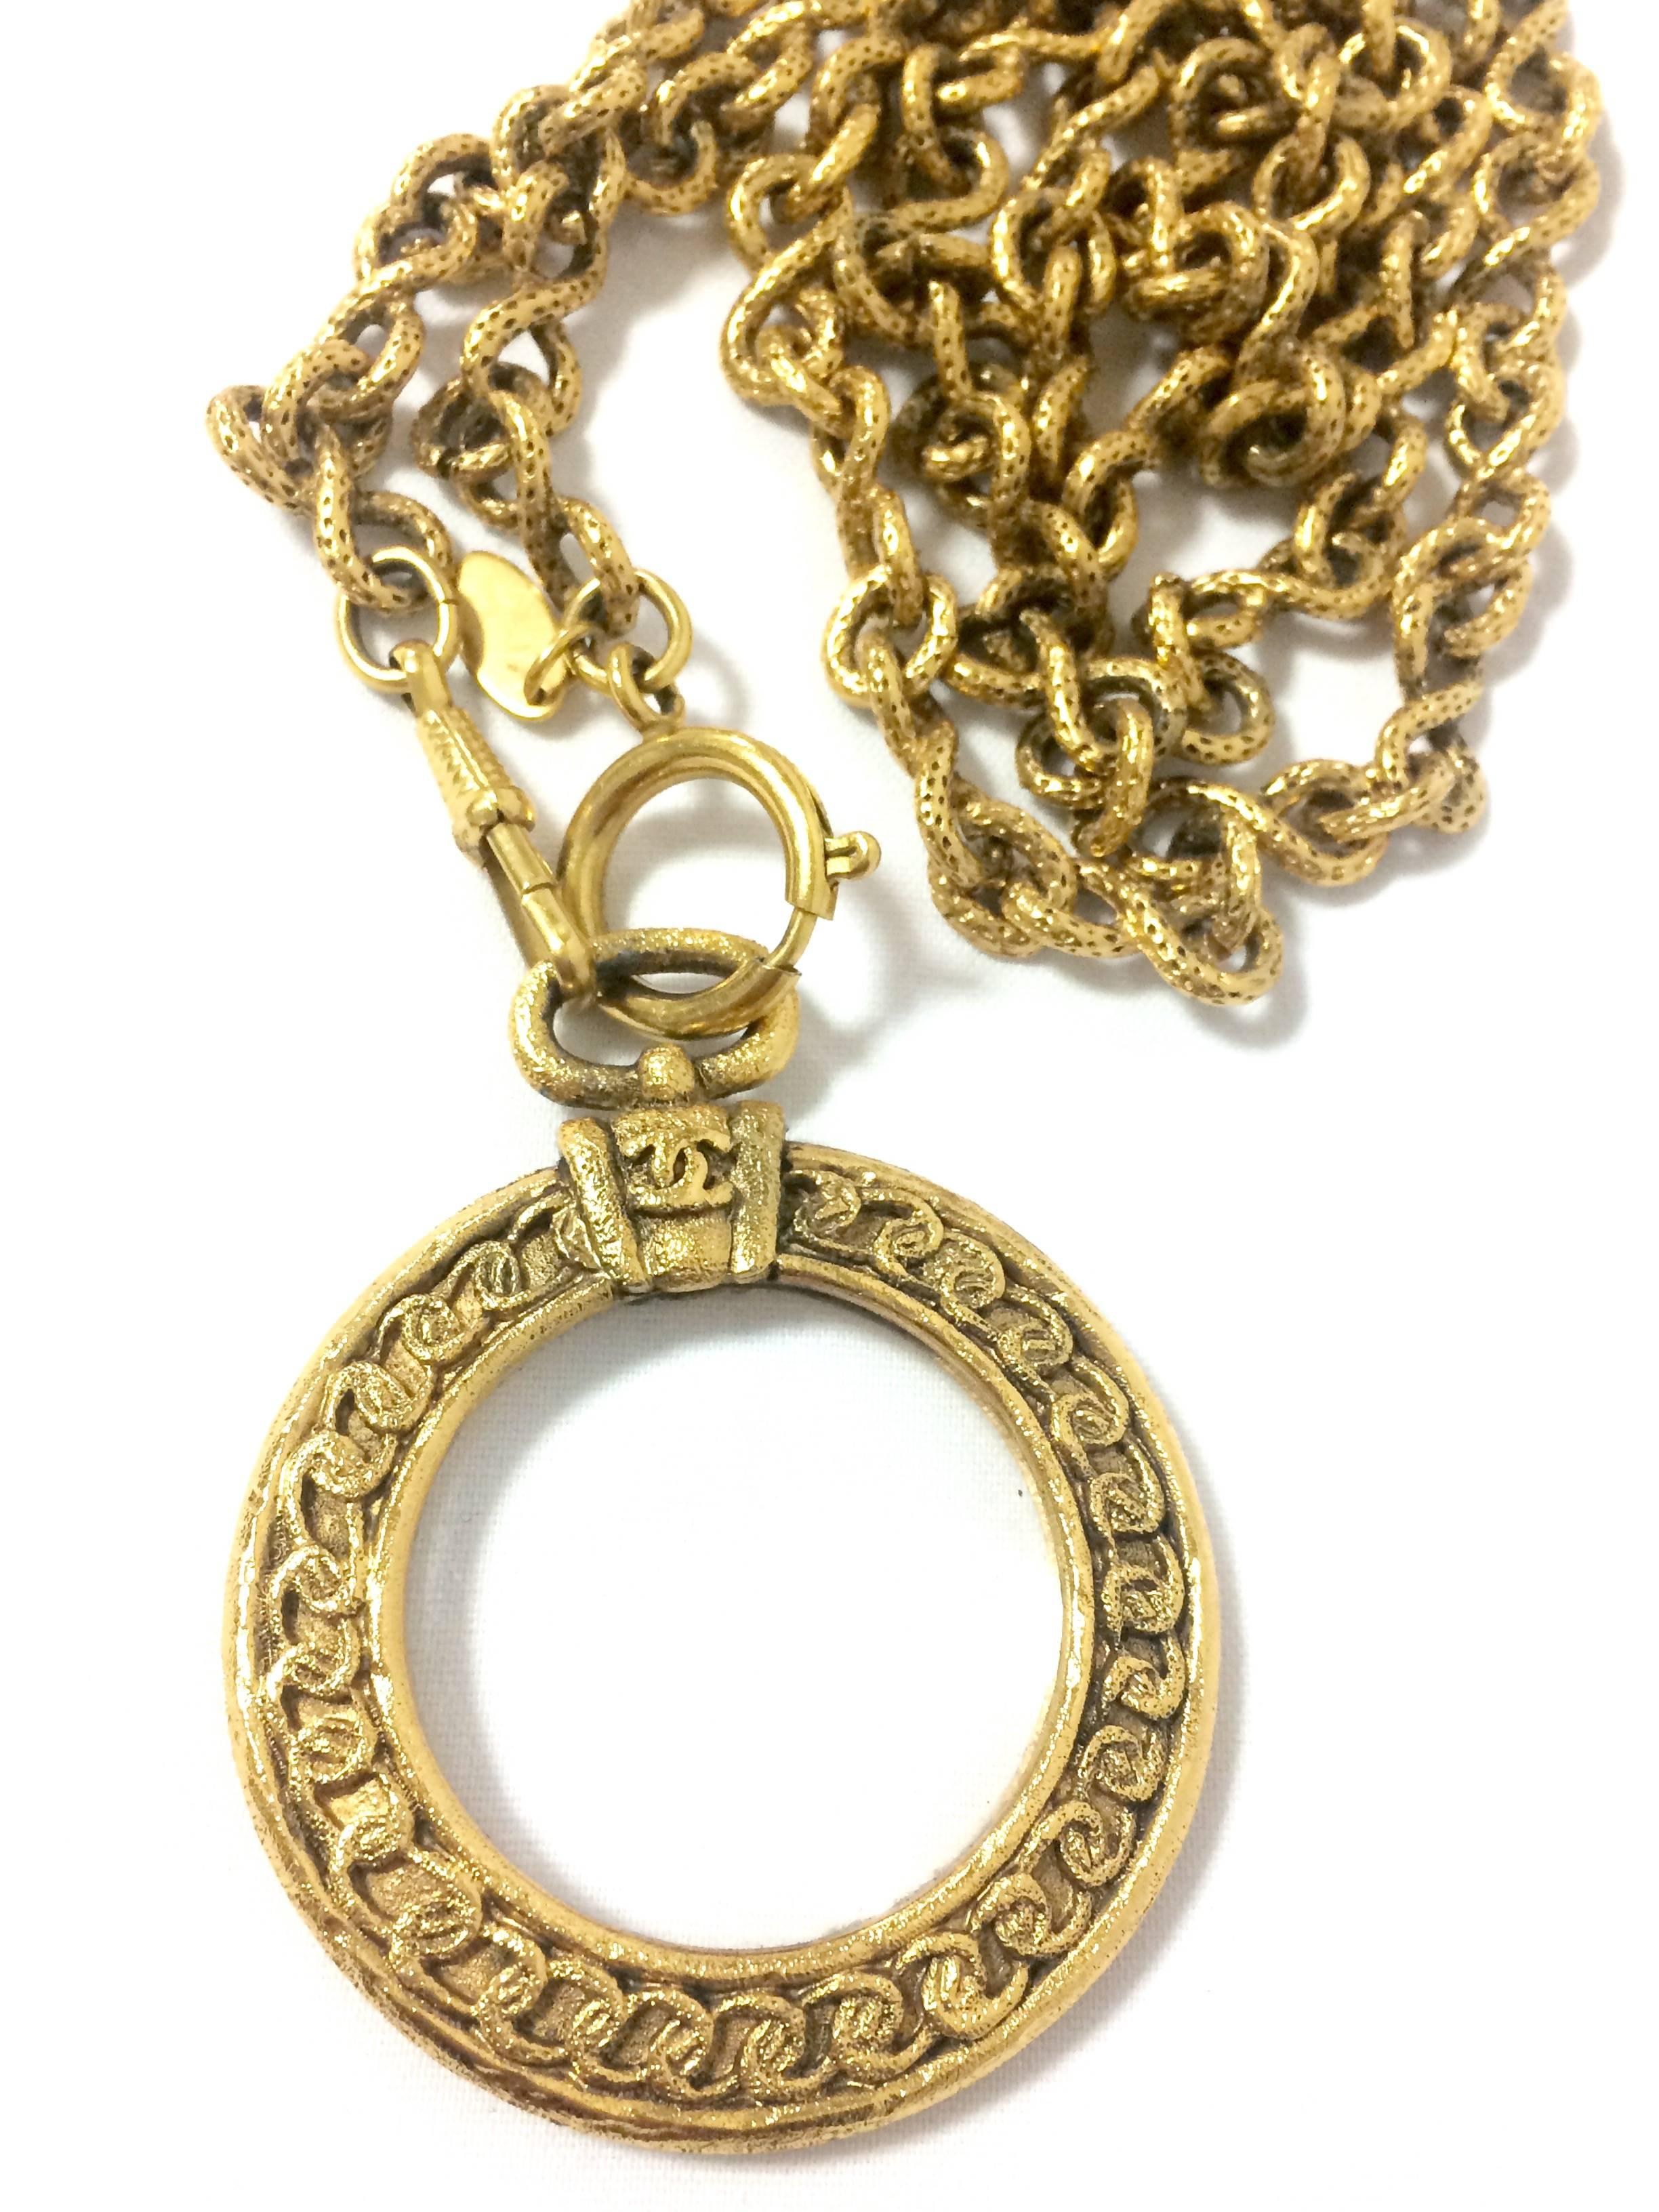 Vintage CHANEL long chain necklace with round glass loupe pendant top and CC. 1